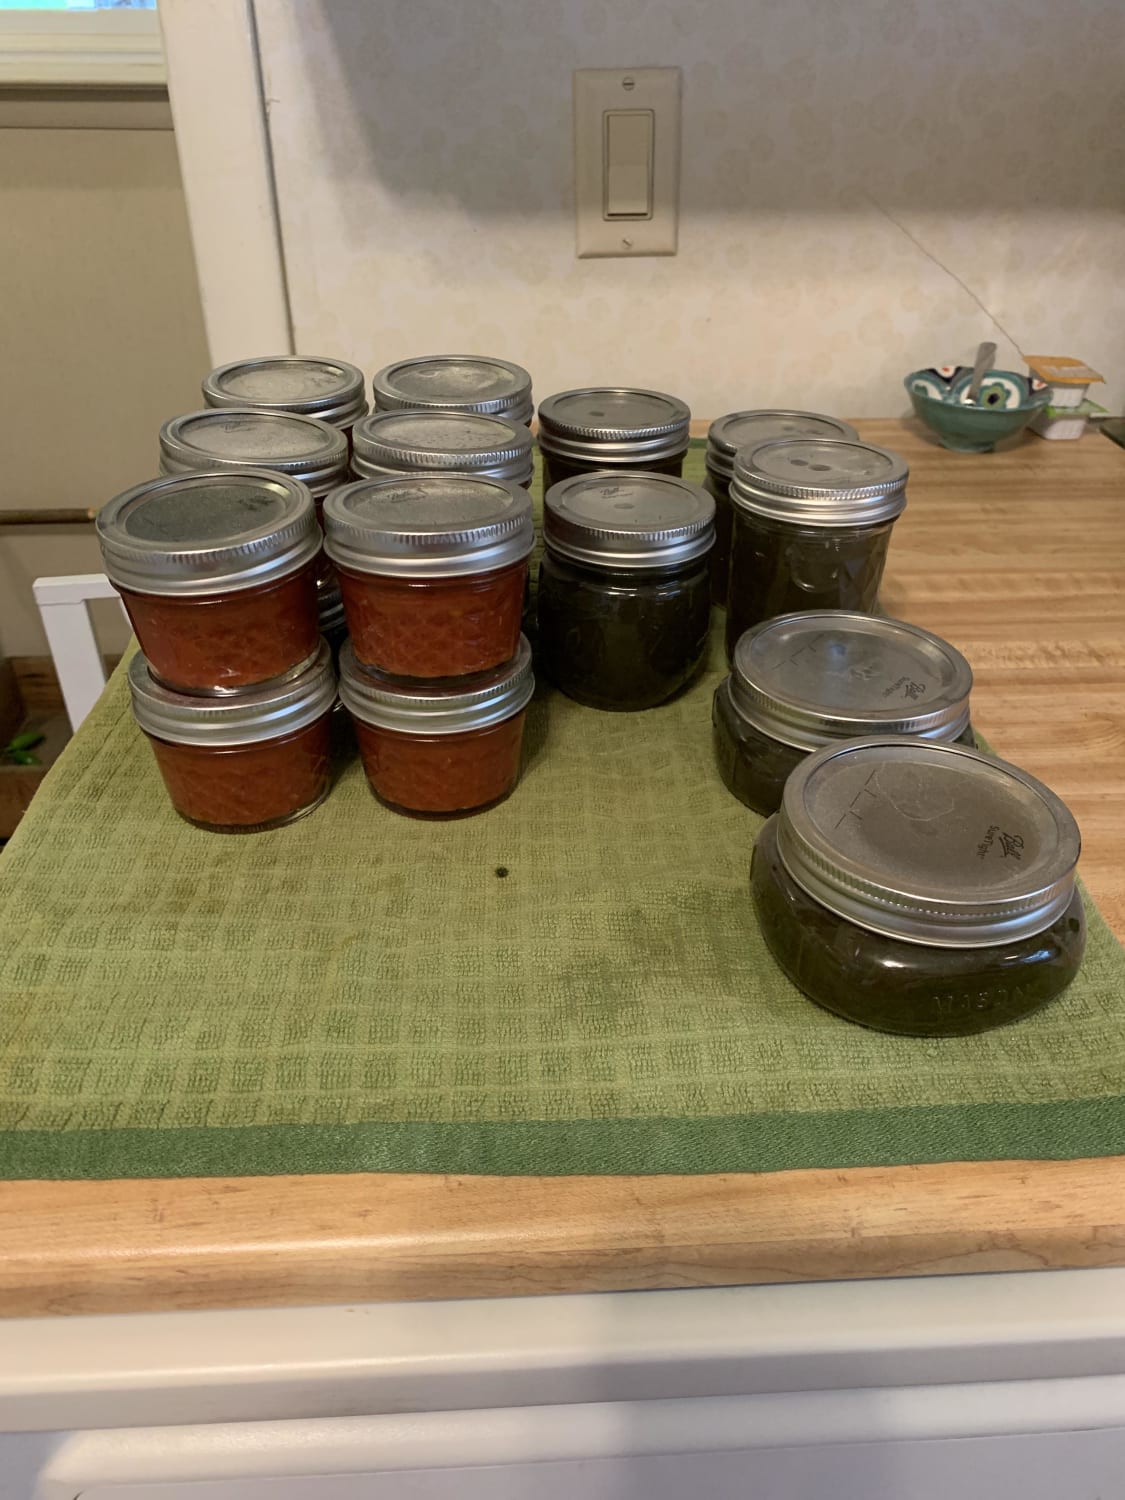 Yesterday’s tomato paste and jalapeño pepper jelly. Long day, but it all tastes delicious!